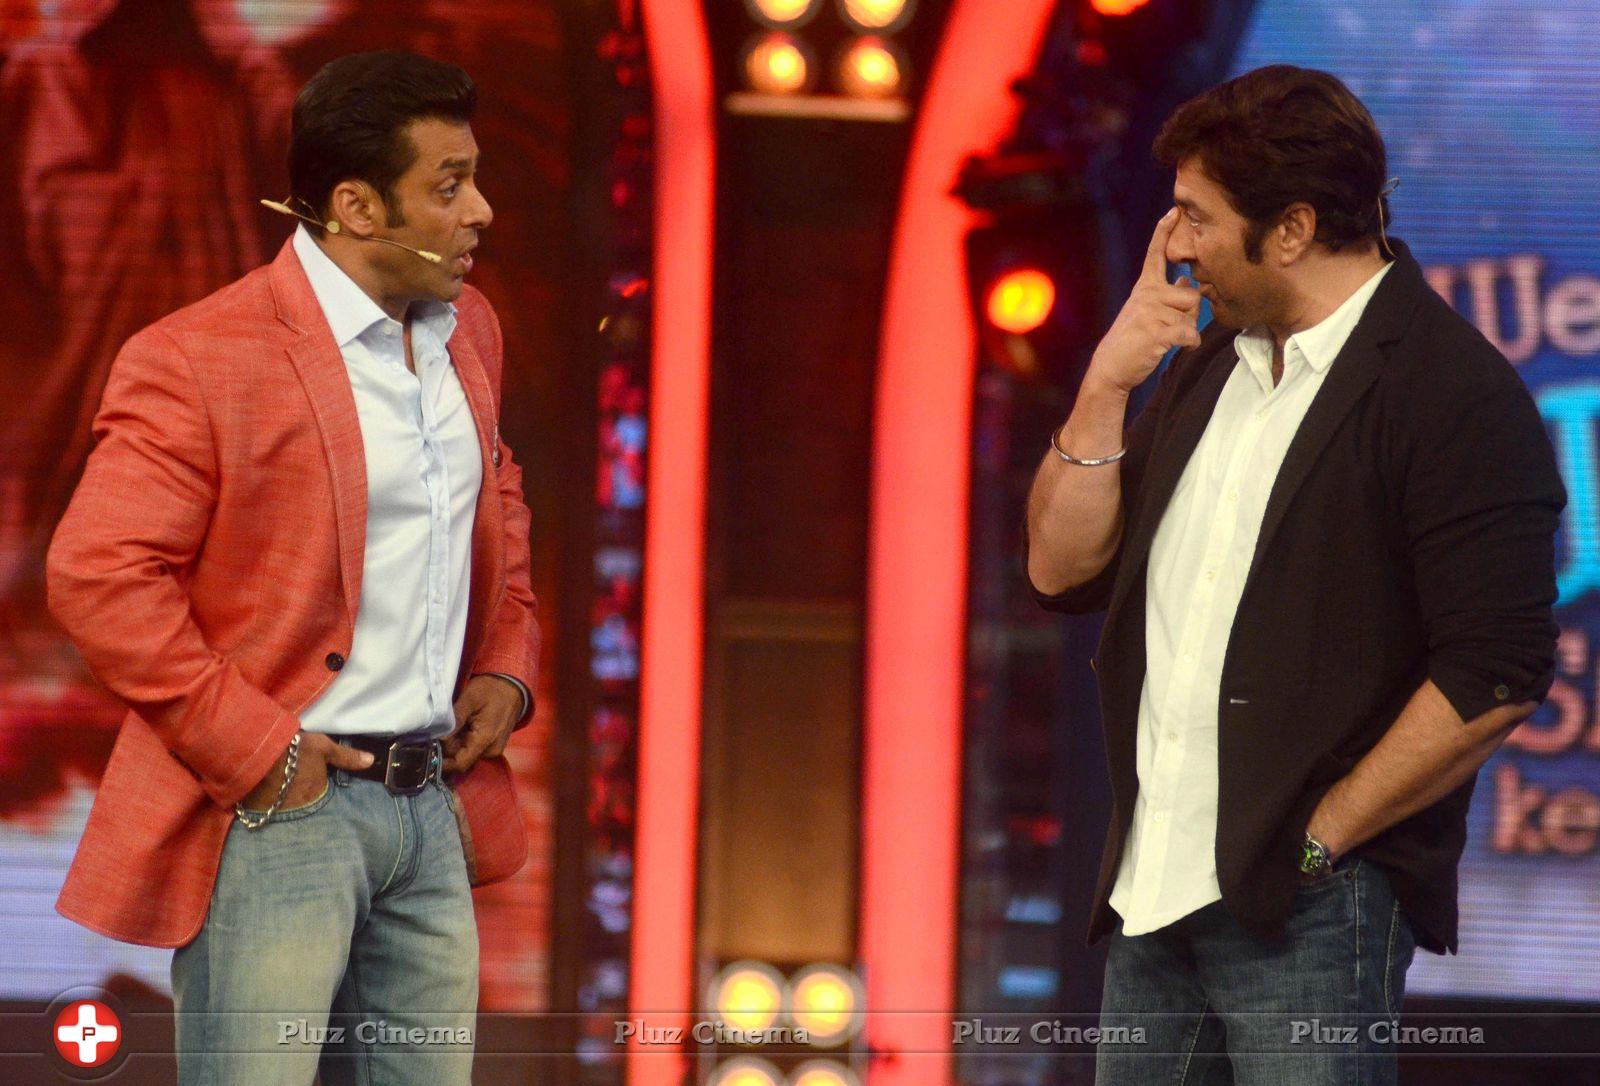 Sunny Deol promotes his film Singh Sahab The Great on the sets of Big Boss With Salman Khan Photos | Picture 633396